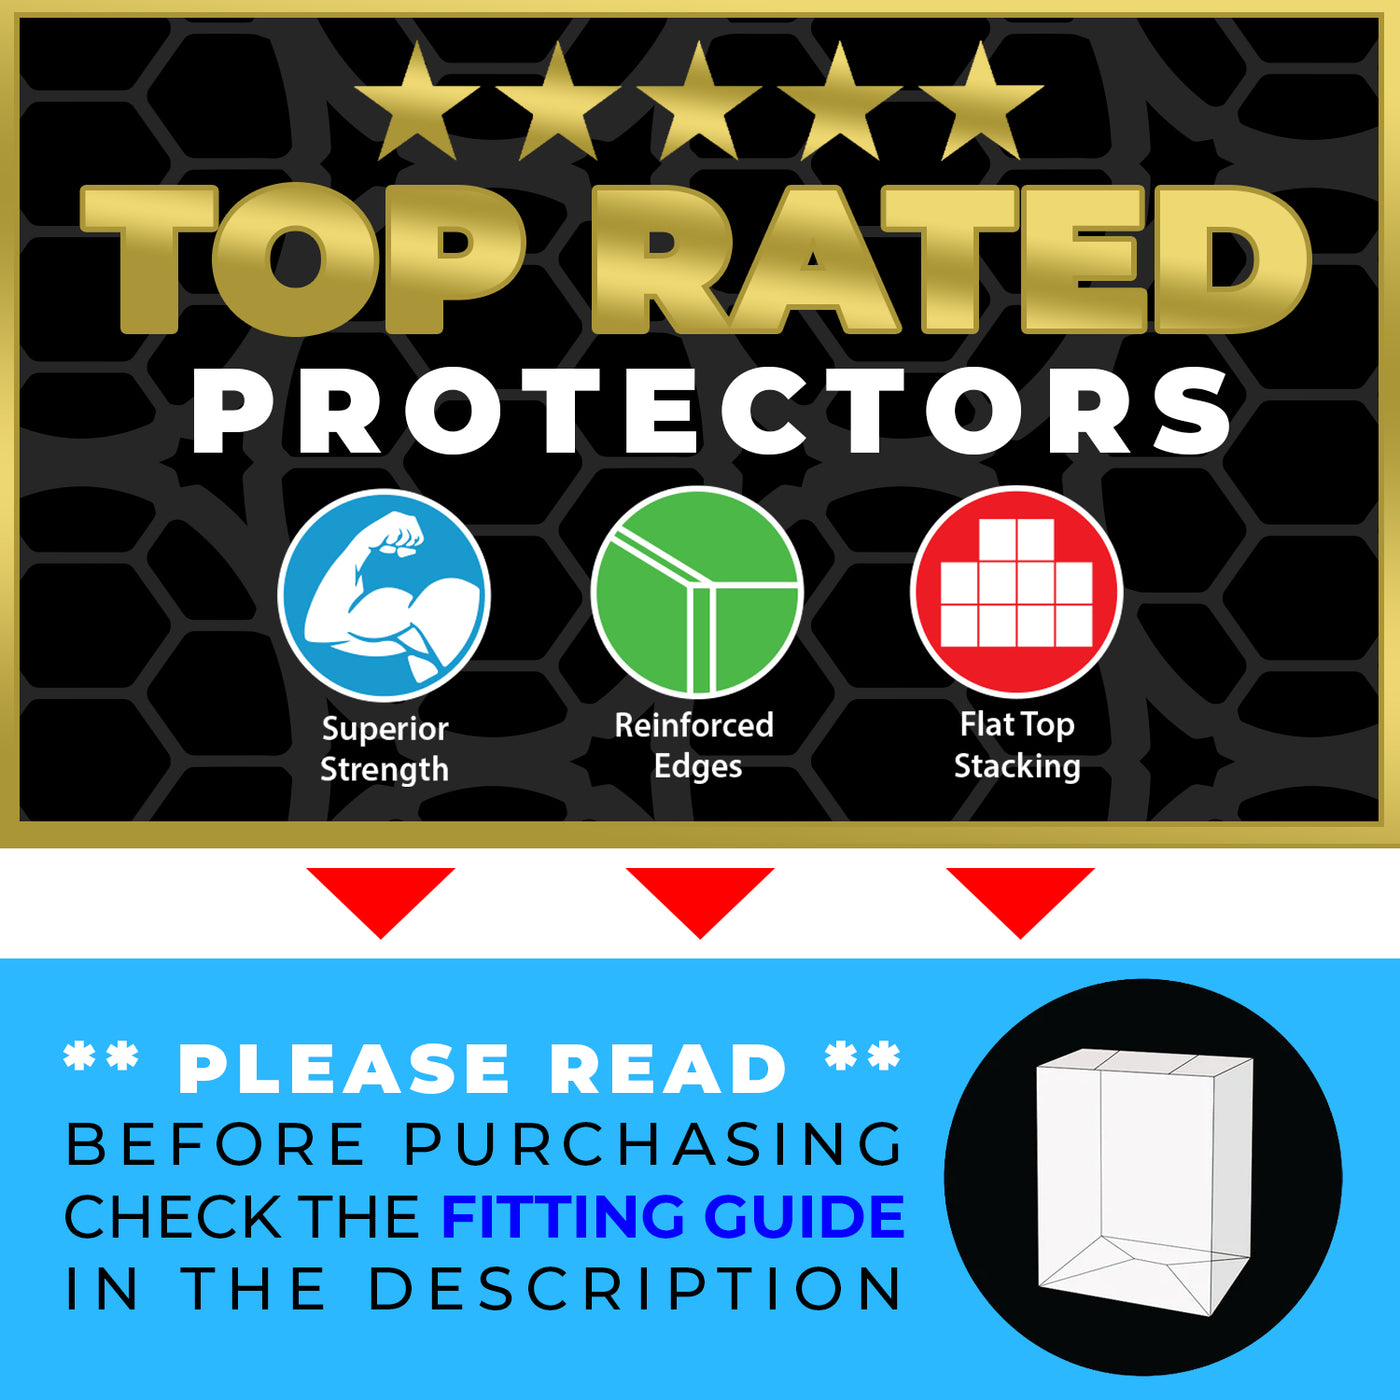 Need Help Finding the Right Pop Protector?